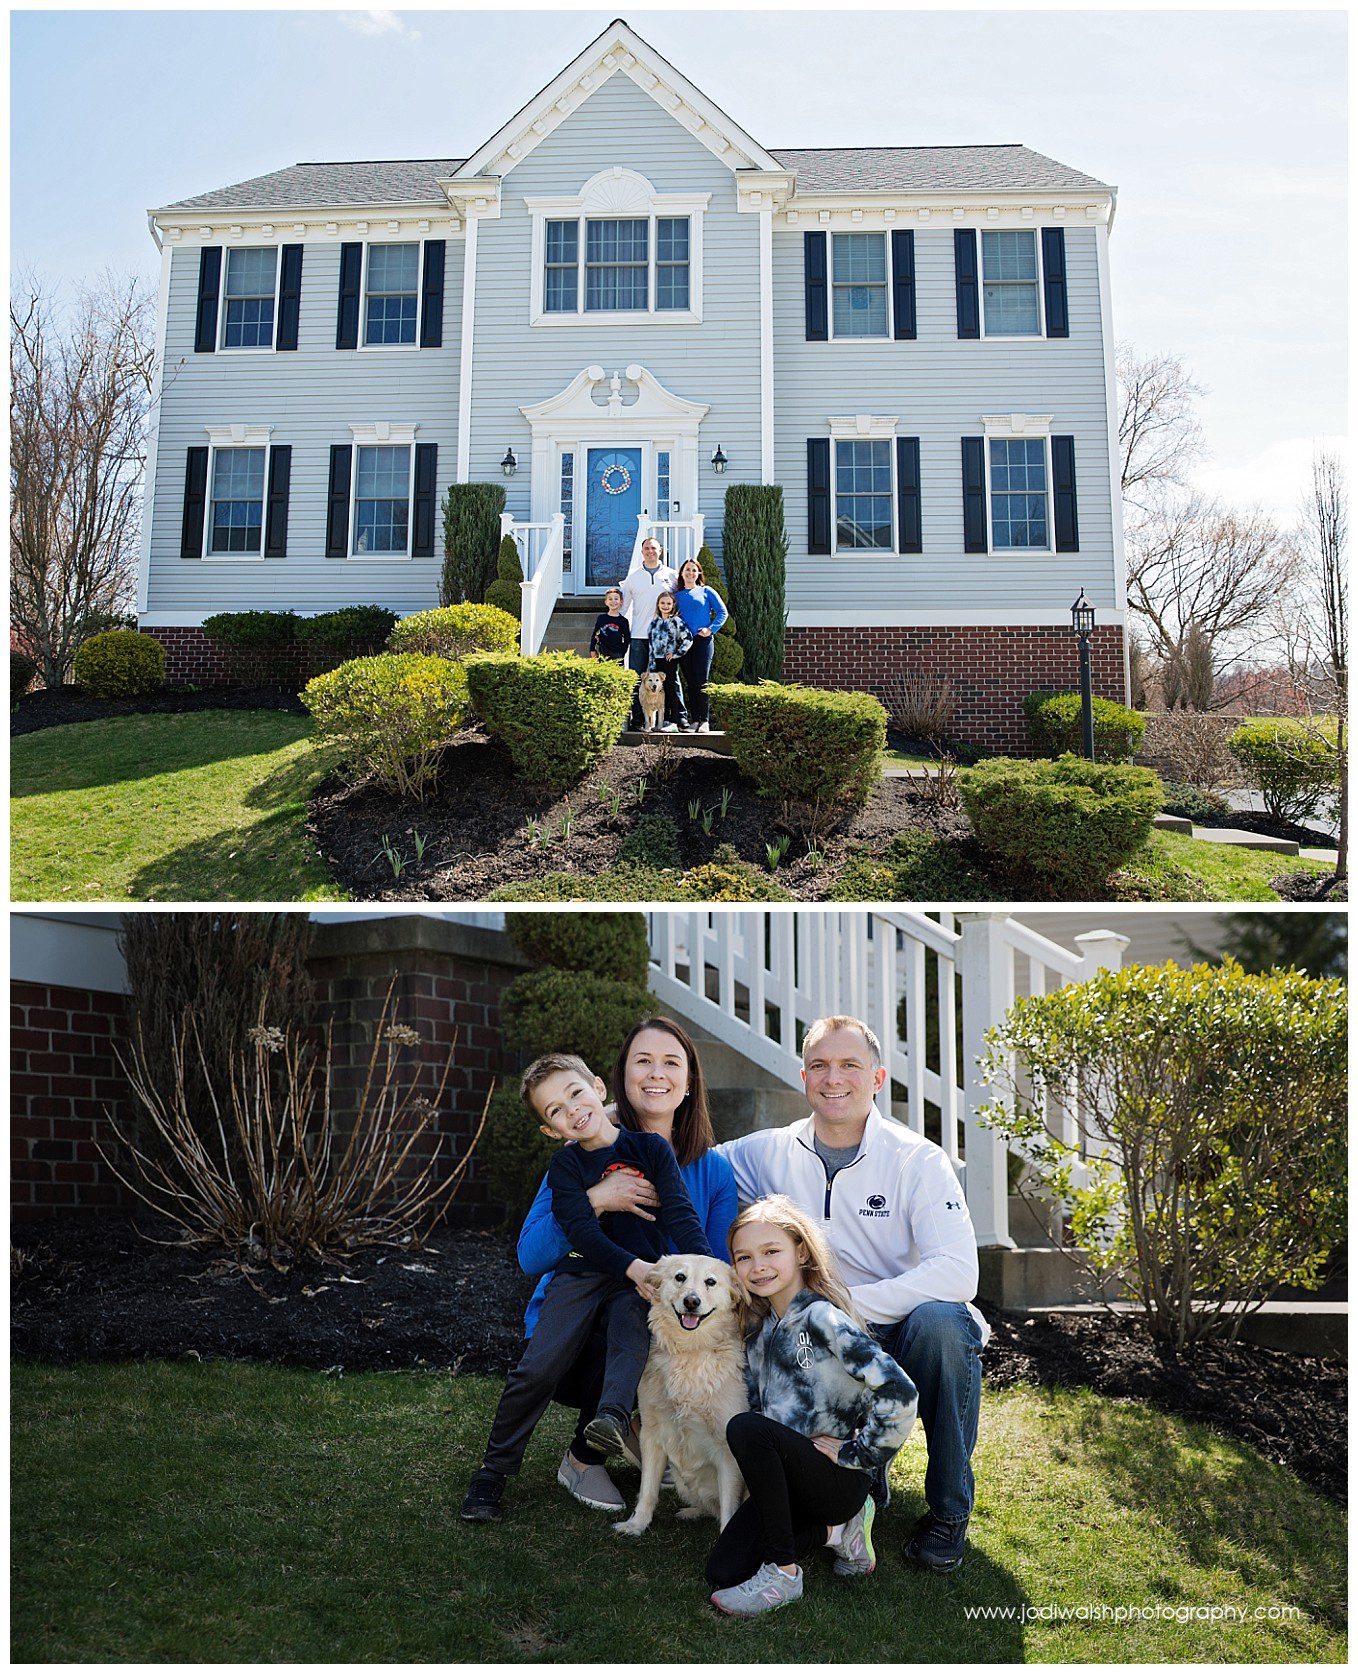 two images of a family posed in front of their homes. Mom has a little boy sitting on her lap. A little girl is sitting next to their dog and seated in front of dad.